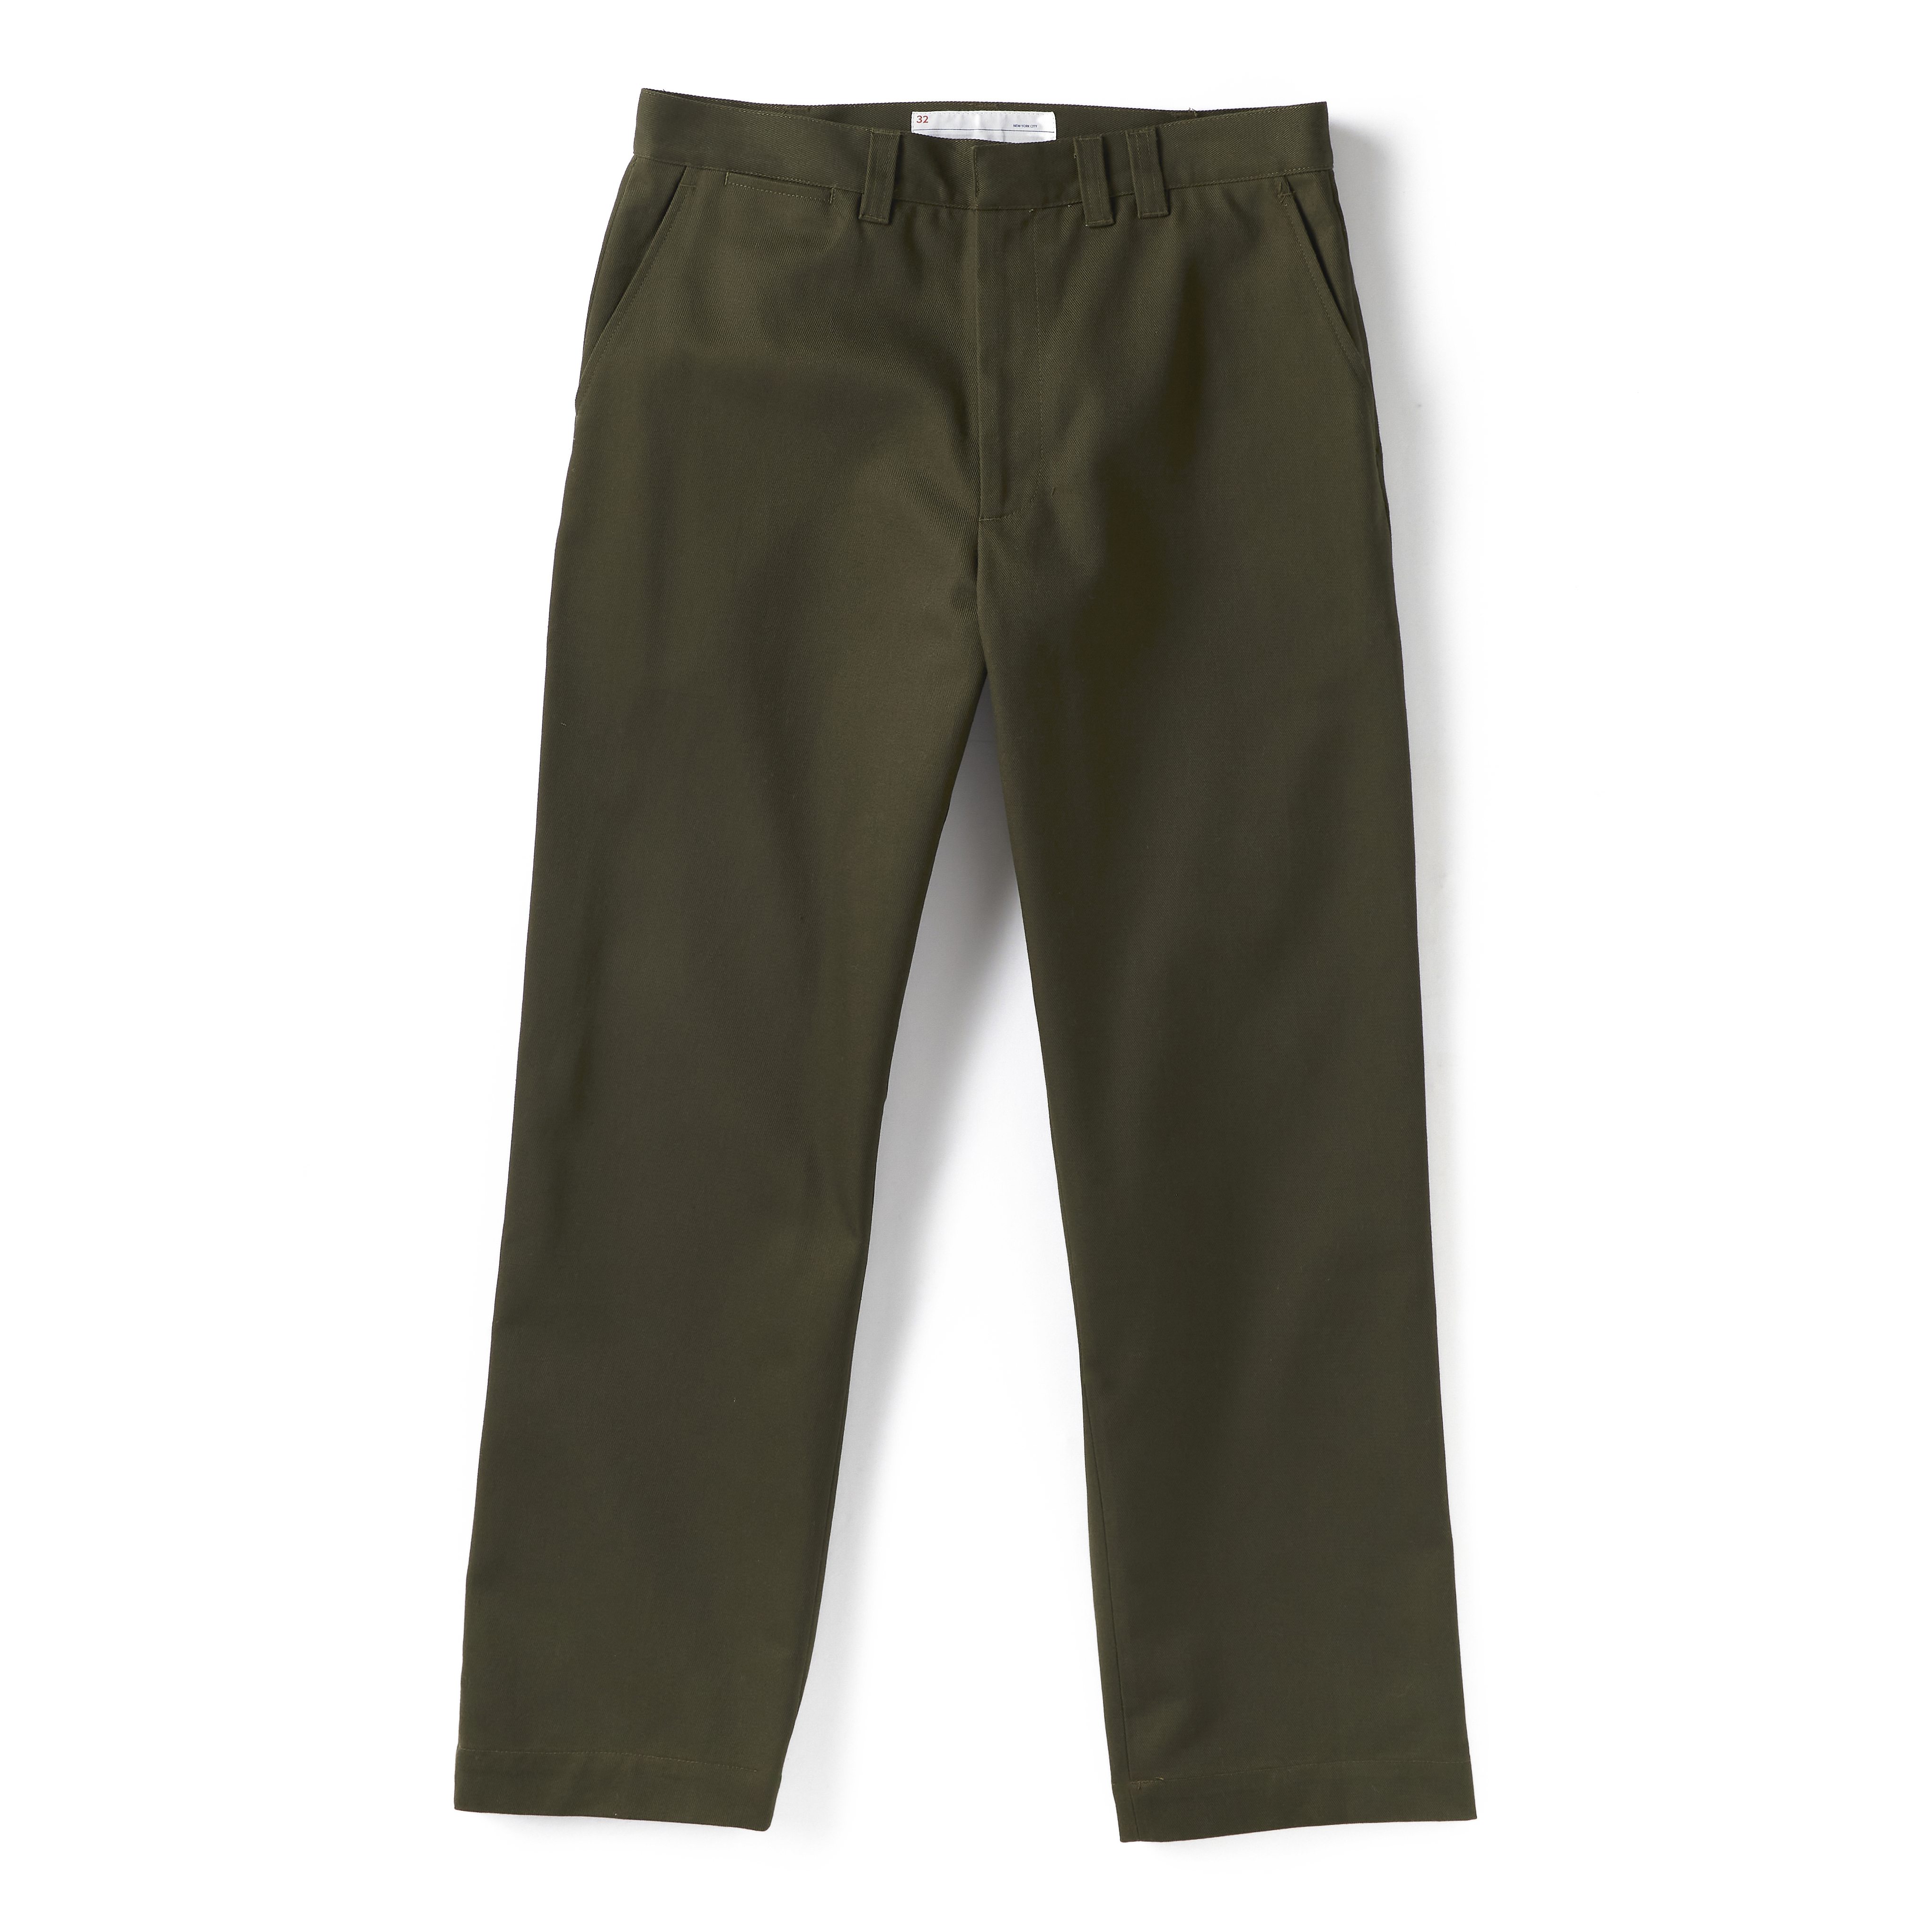 The 1620 Durastretch® Cargo Pant | 4-Way Stretch | Made in the U.S.A. -  1620 Workwear, Inc